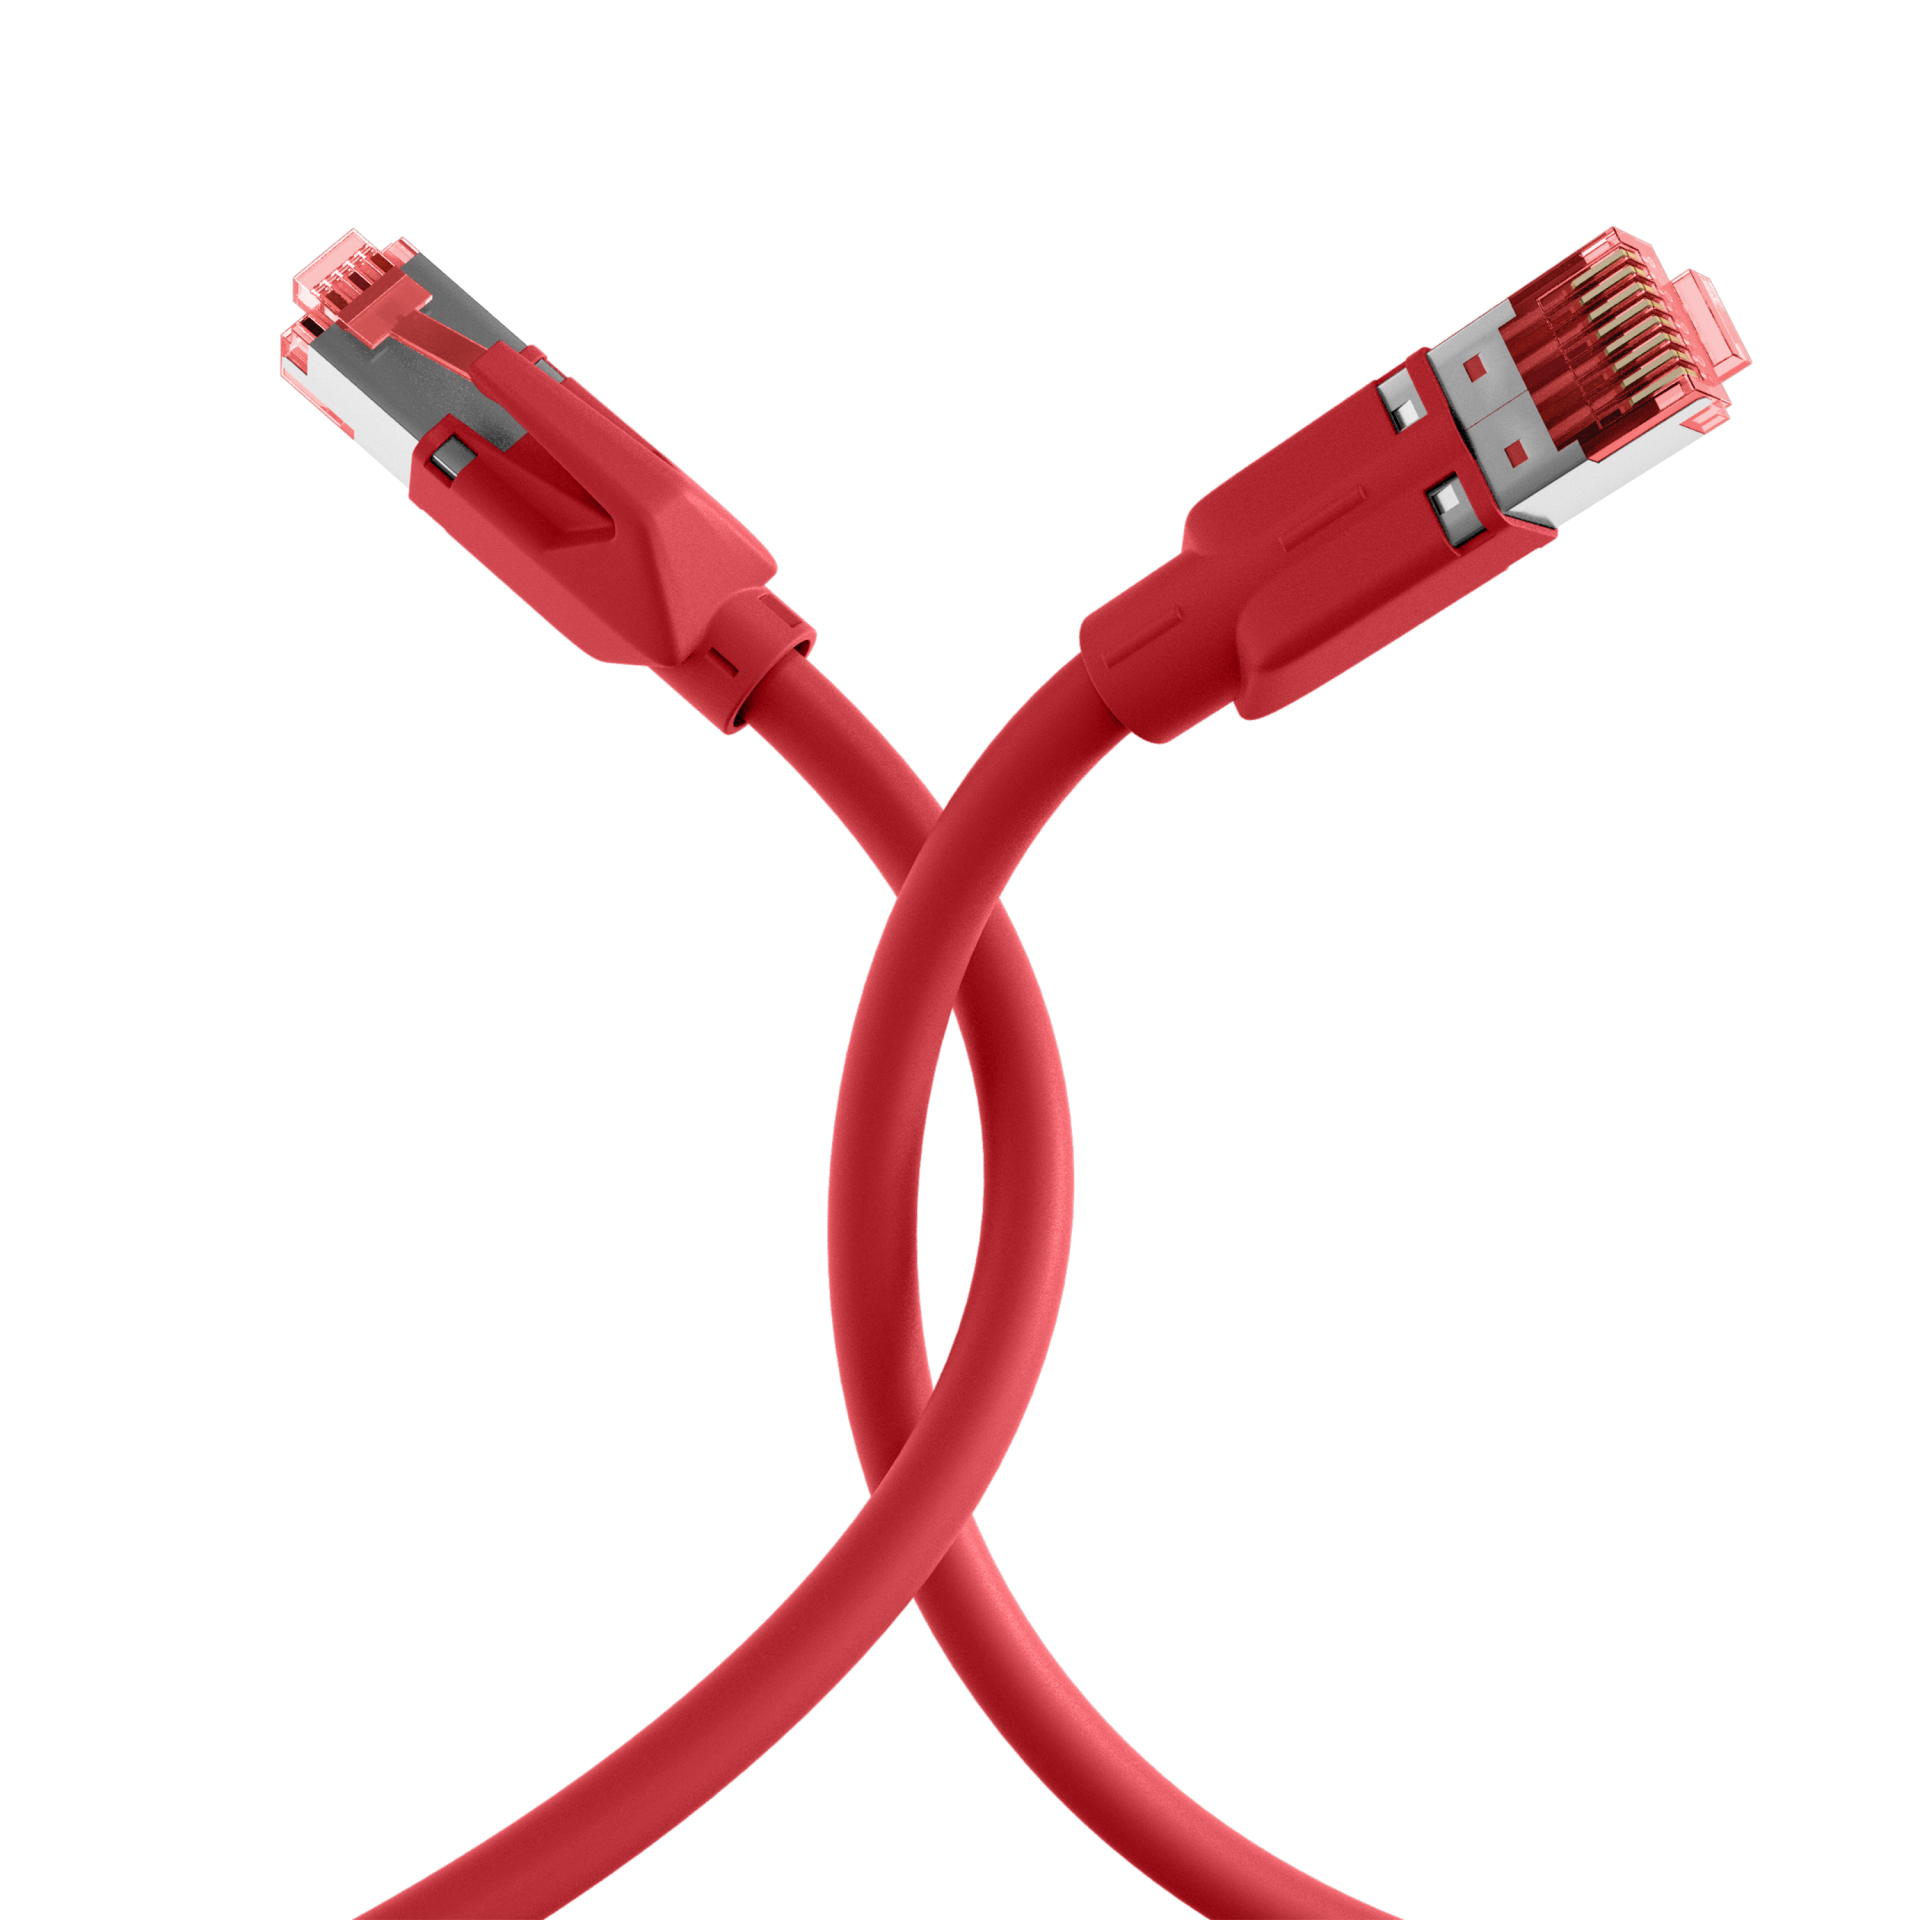 RJ45 Patch Cord Cat.6A S/FTP Dätwyler 7702 TM21 red 1,5m